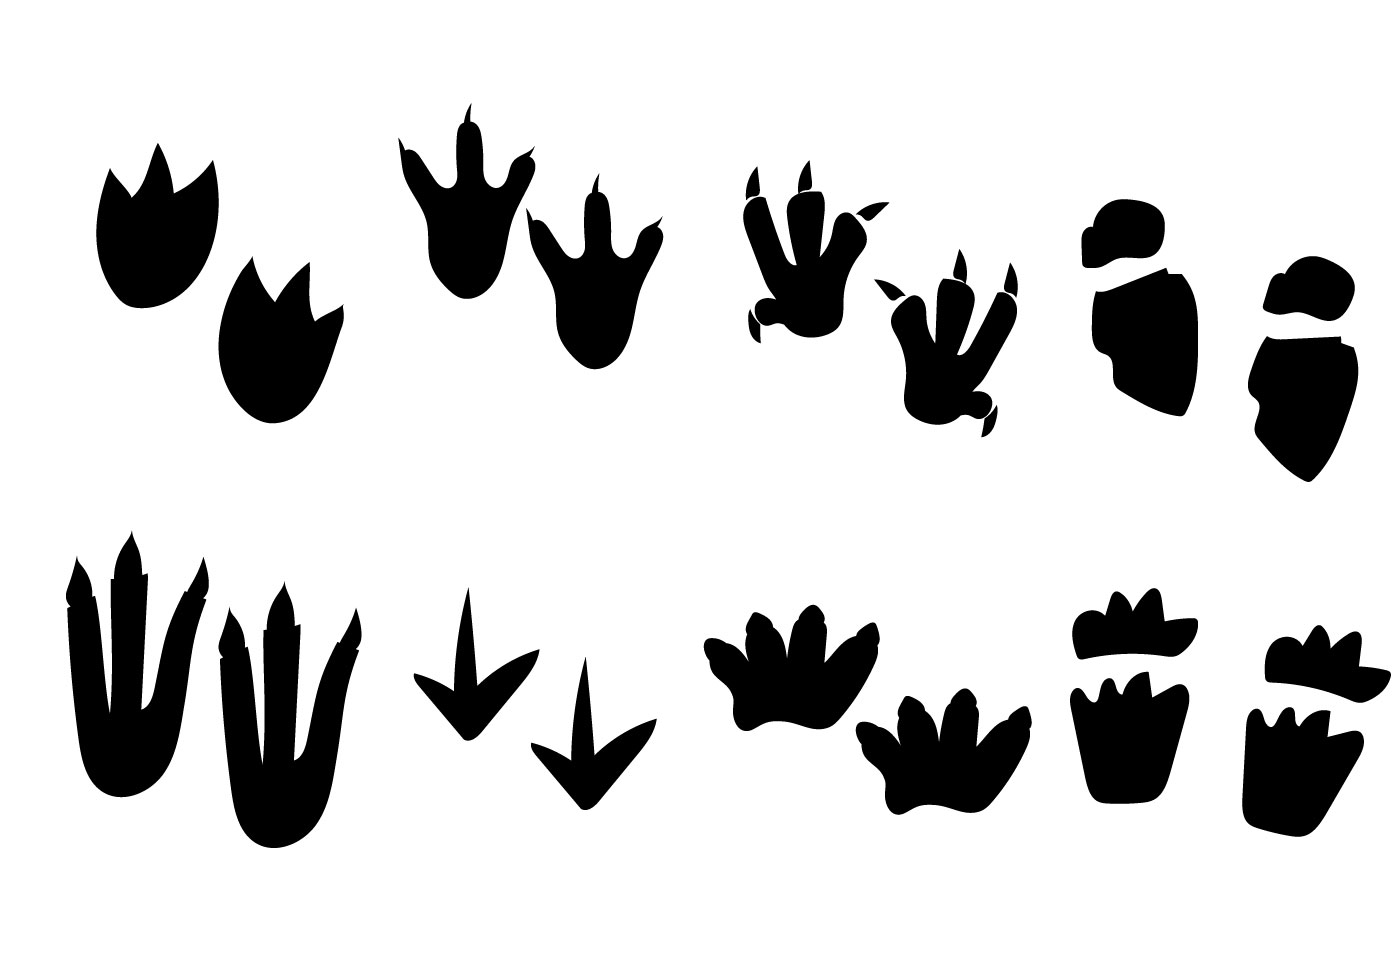 Download the Dinosaur Black and White Footprint Vector 97084 royalty-free V...